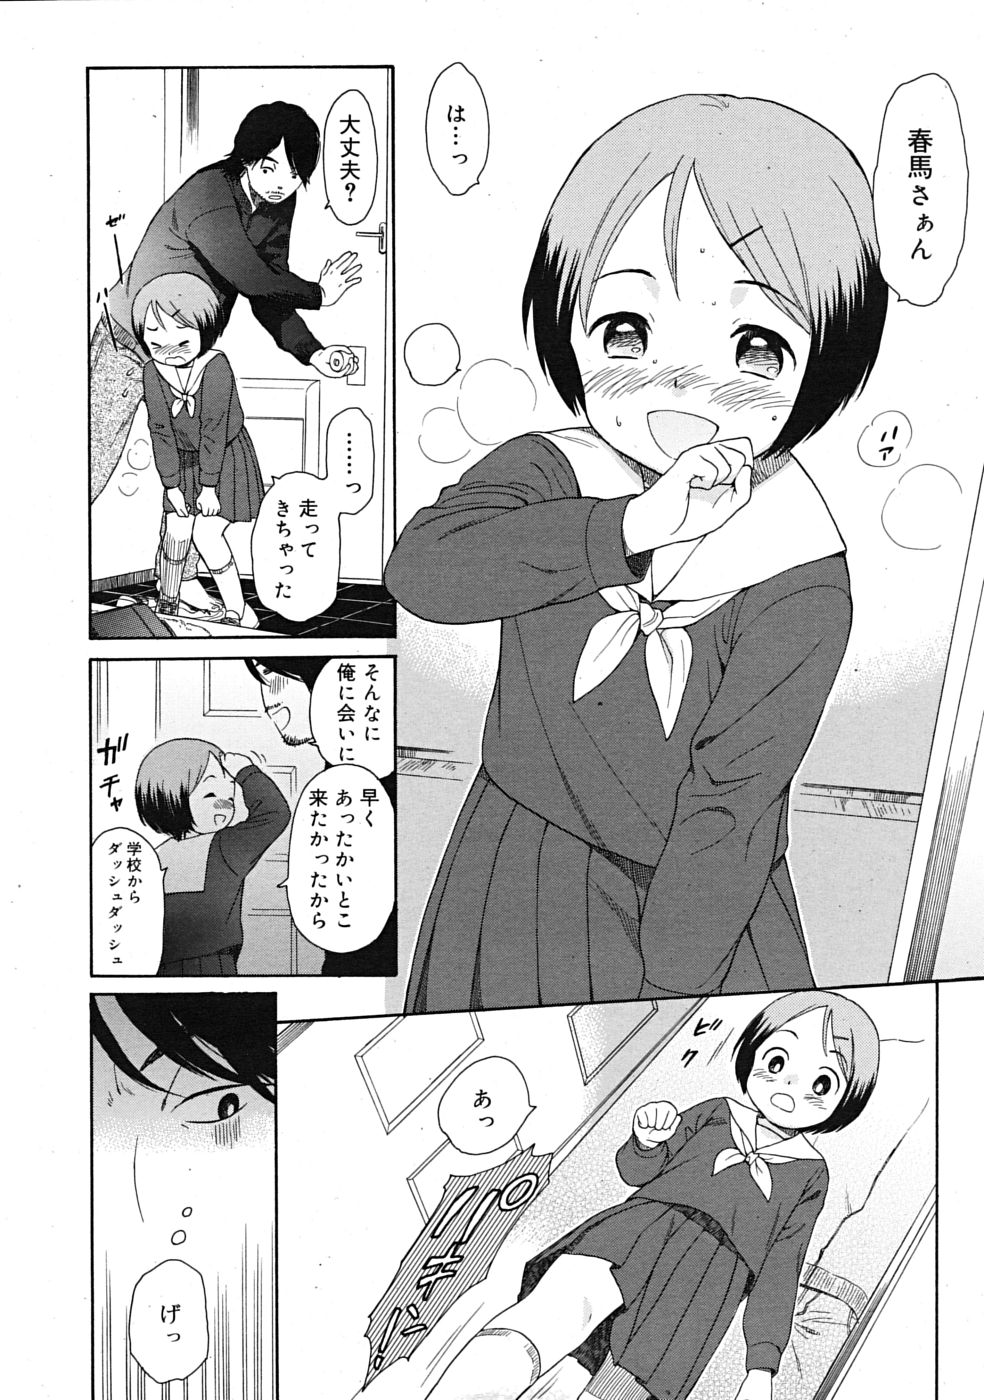 Comic RiN [2009-09] page 30 full